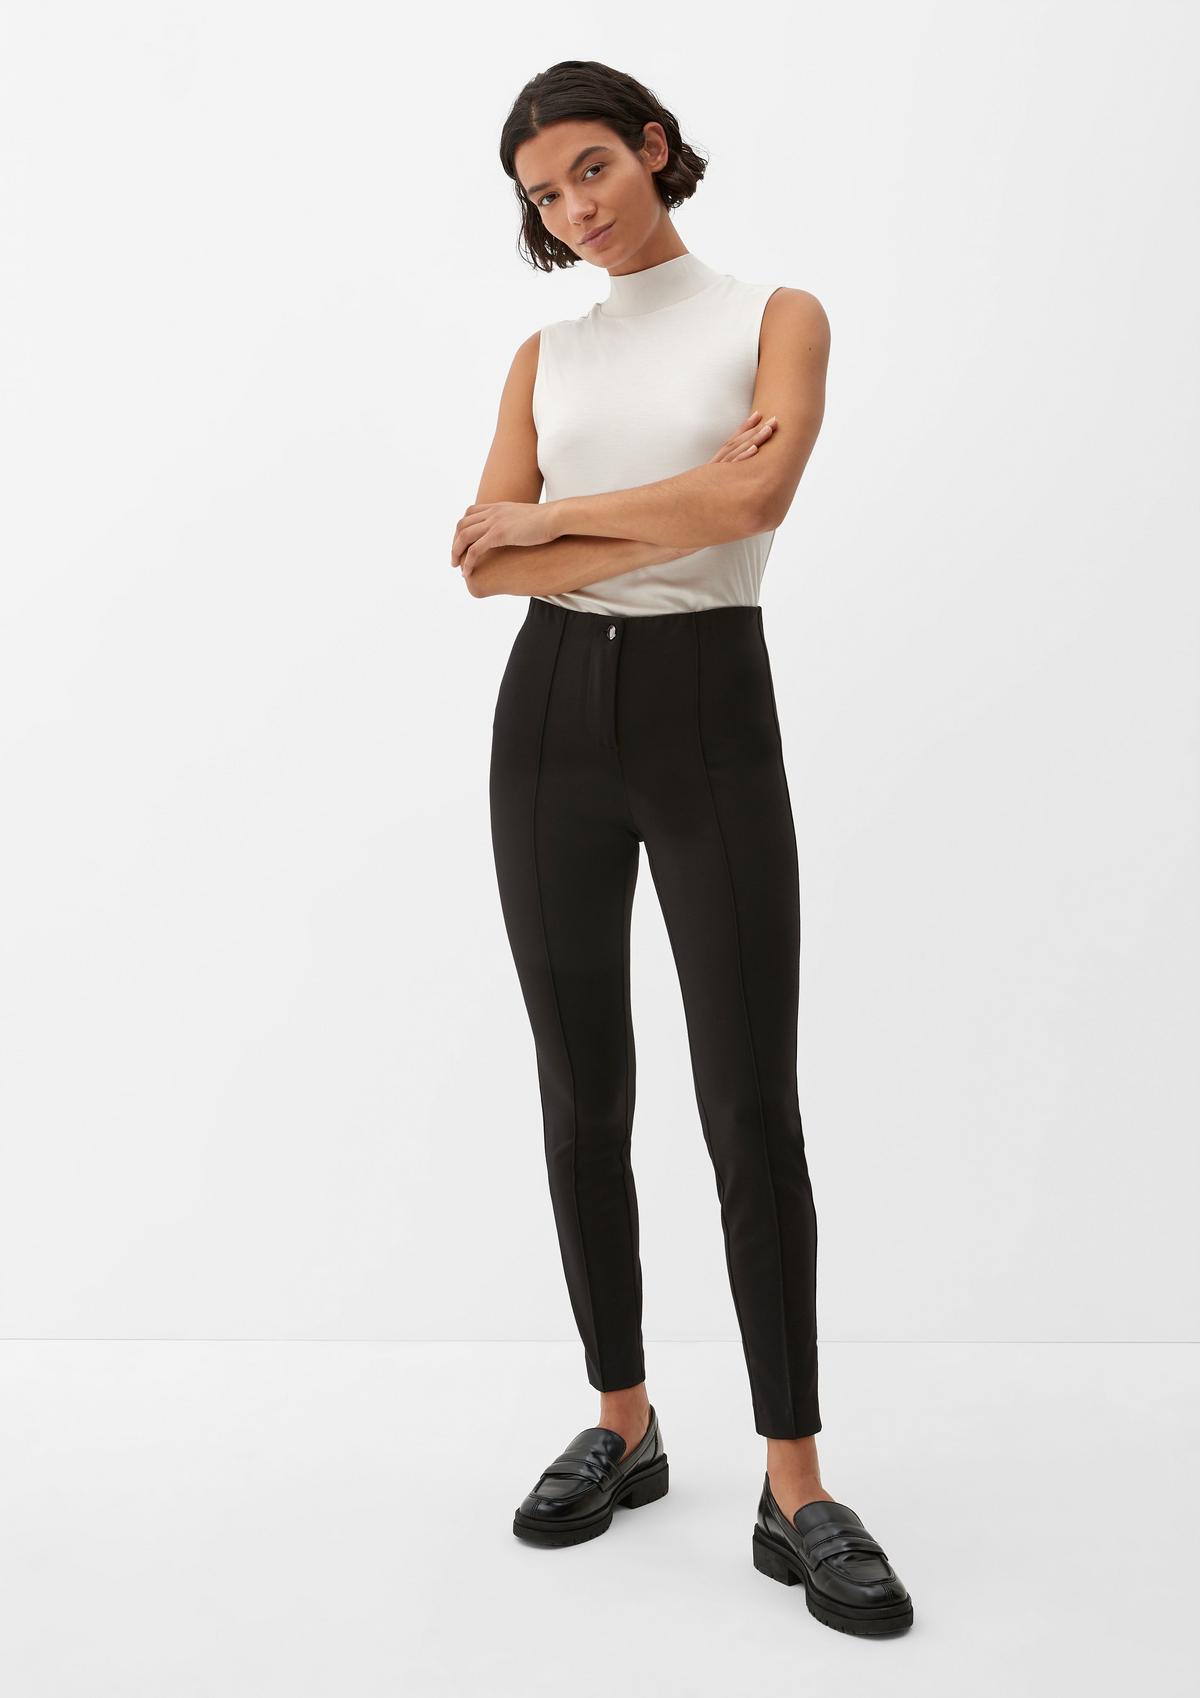 Pintuck Leggings with Slimming Waistband